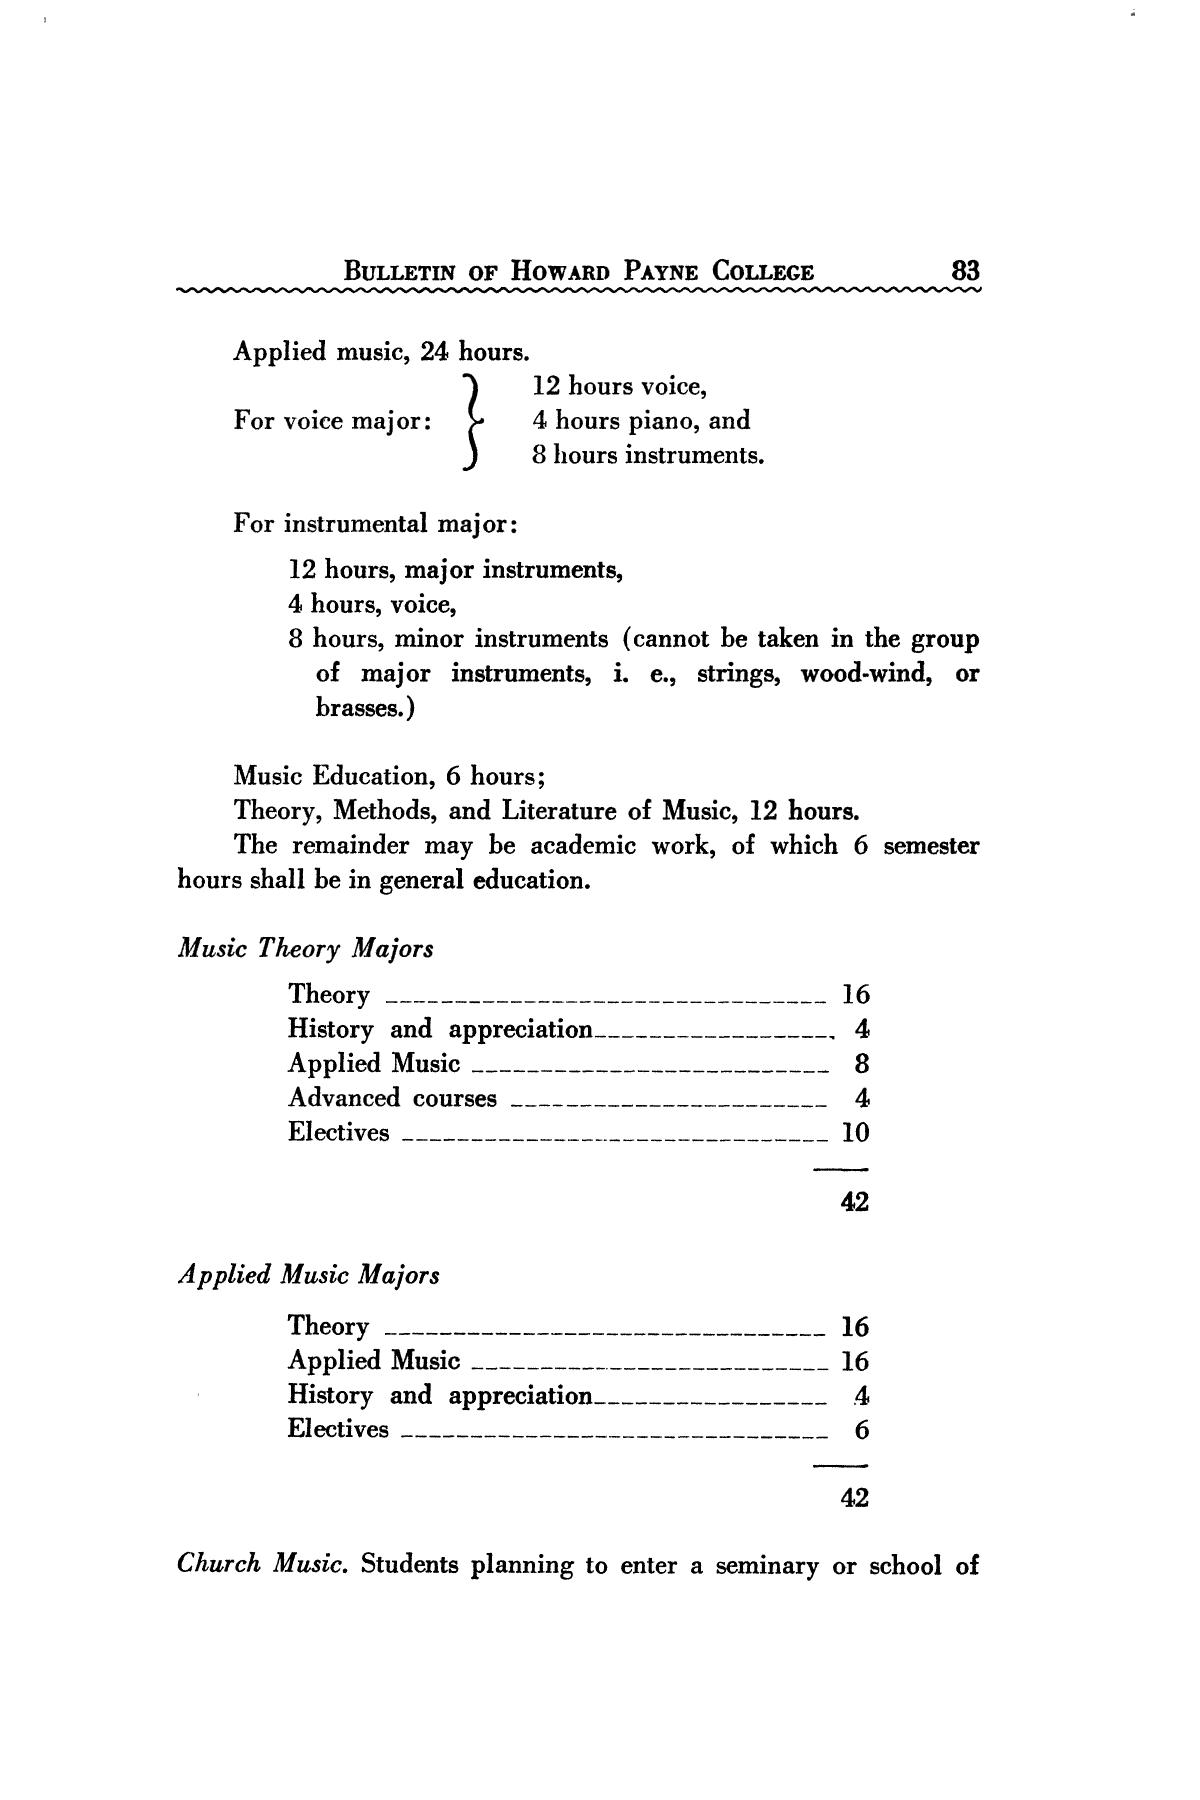 Catalogue of Howard Payne College, 1940-1941
                                                
                                                    83
                                                